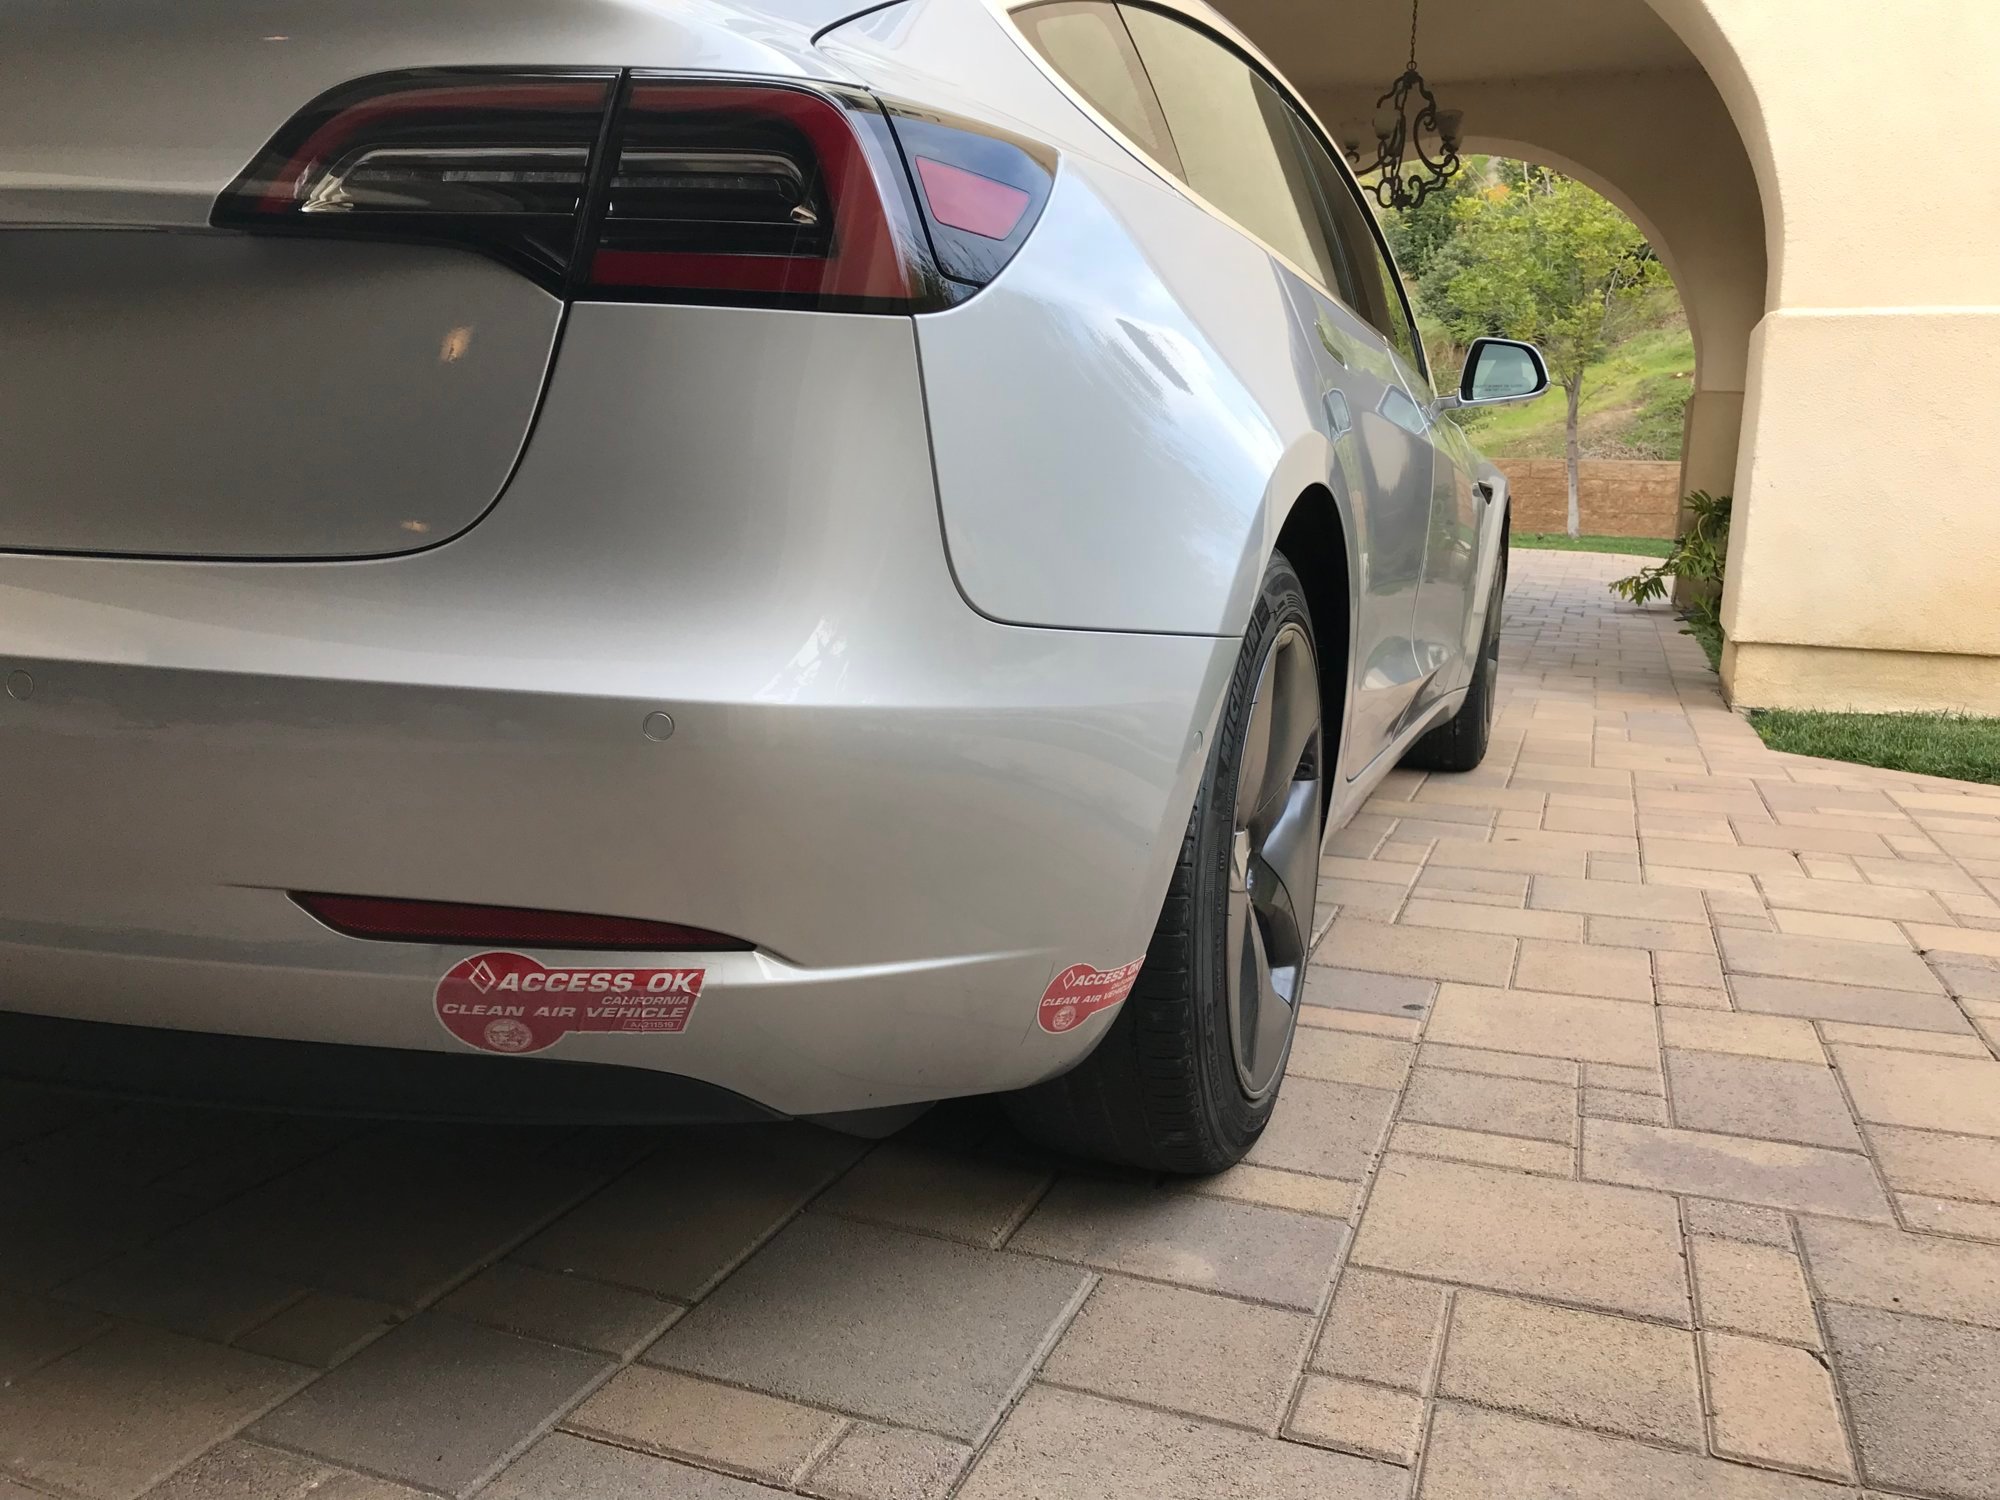 received-red-california-hov-stickers-for-model-3-page-3-tesla